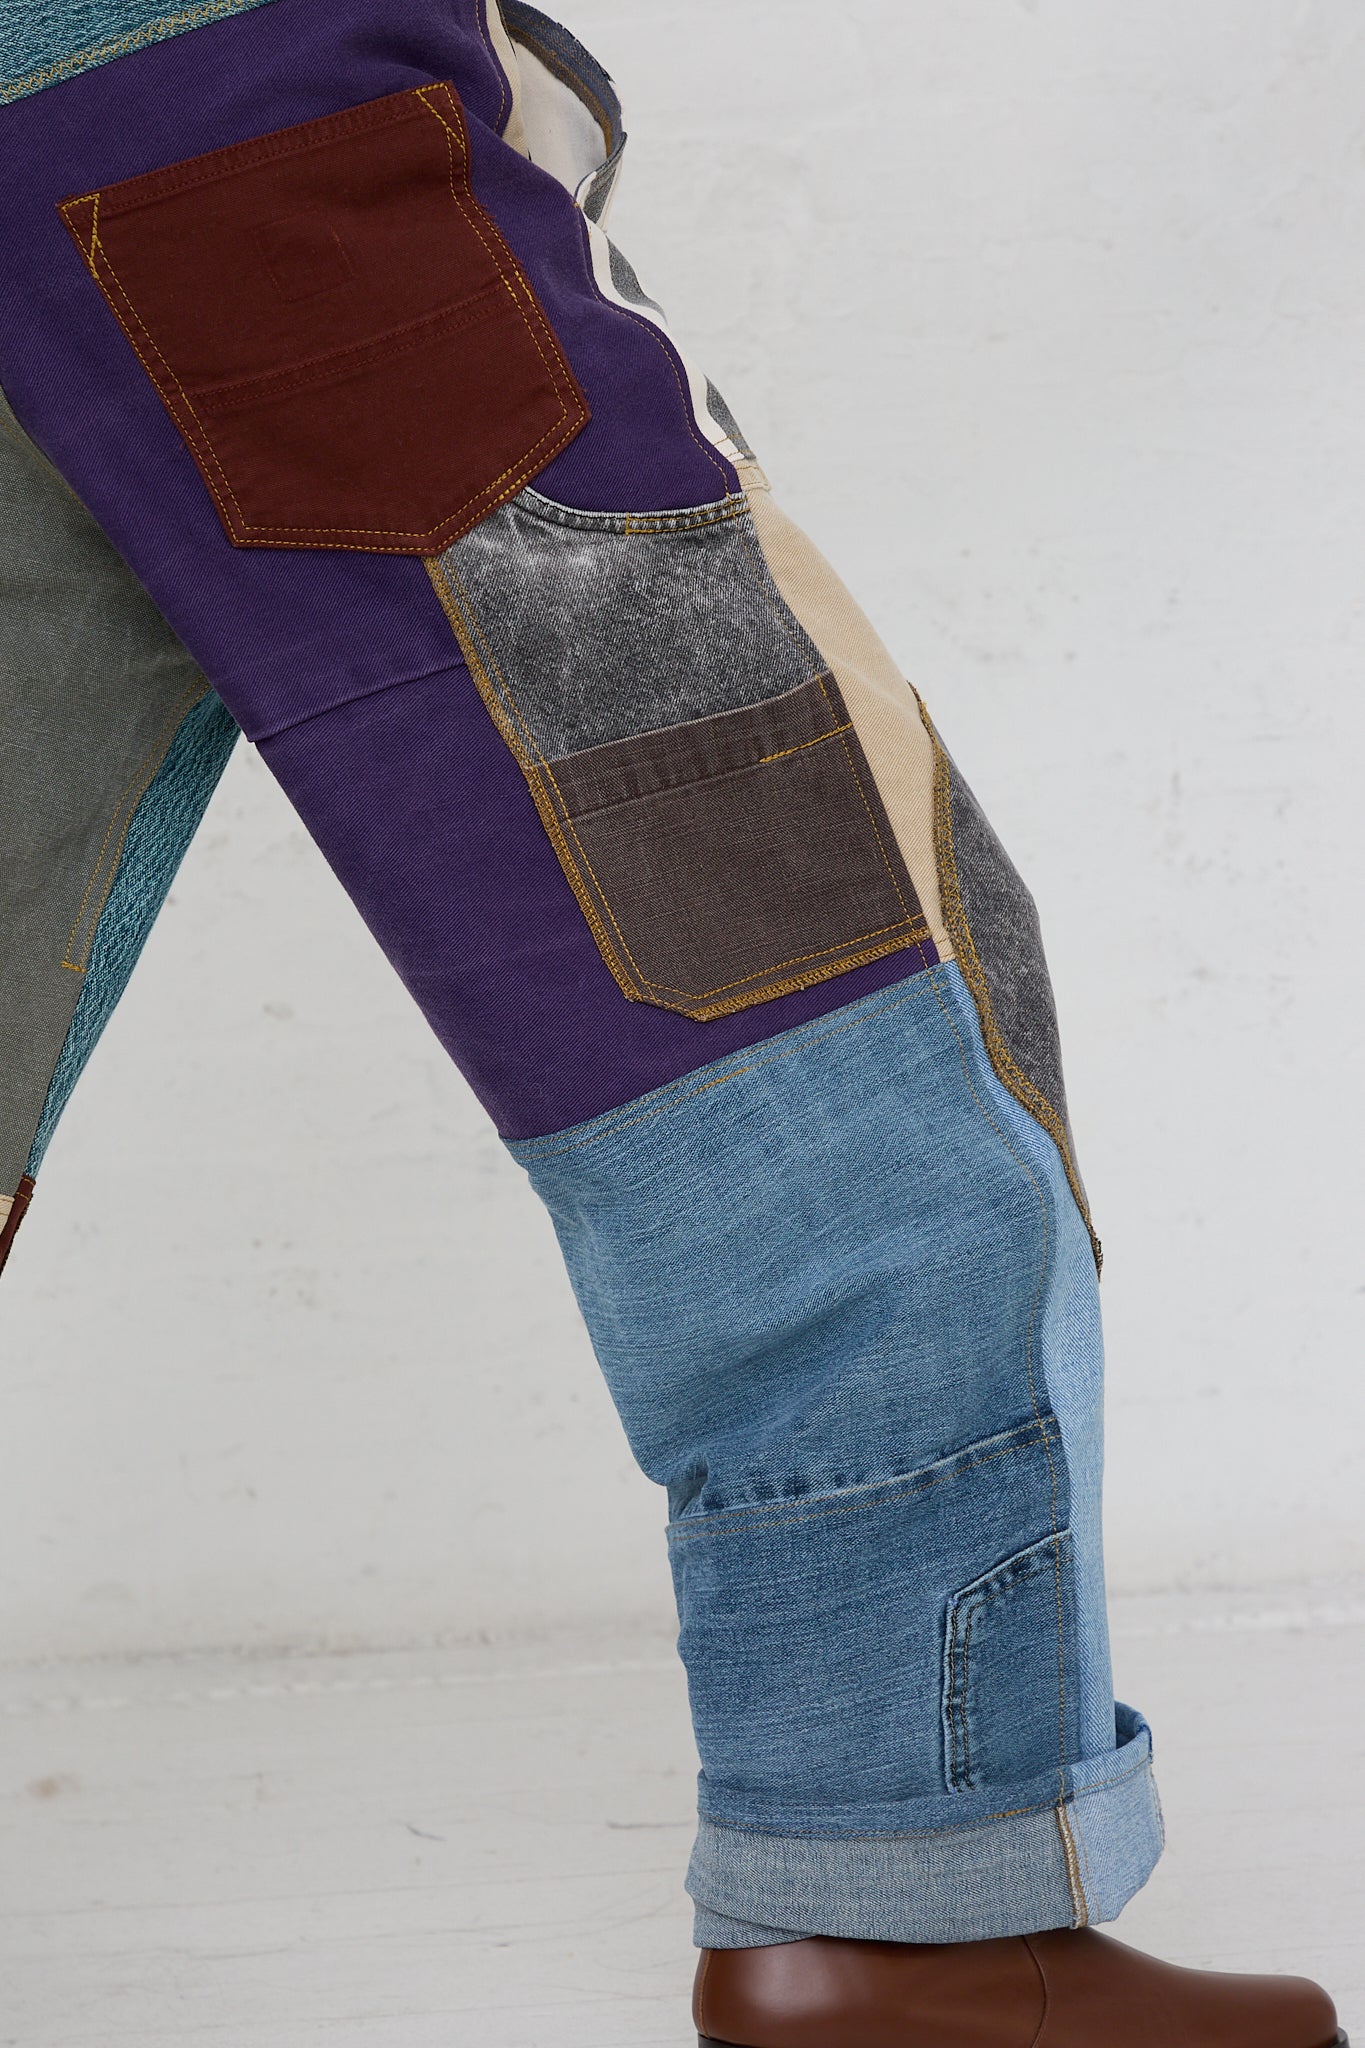 A person wearing a colorful pair of WildRootz Reworked Jeans in Multicolor II.